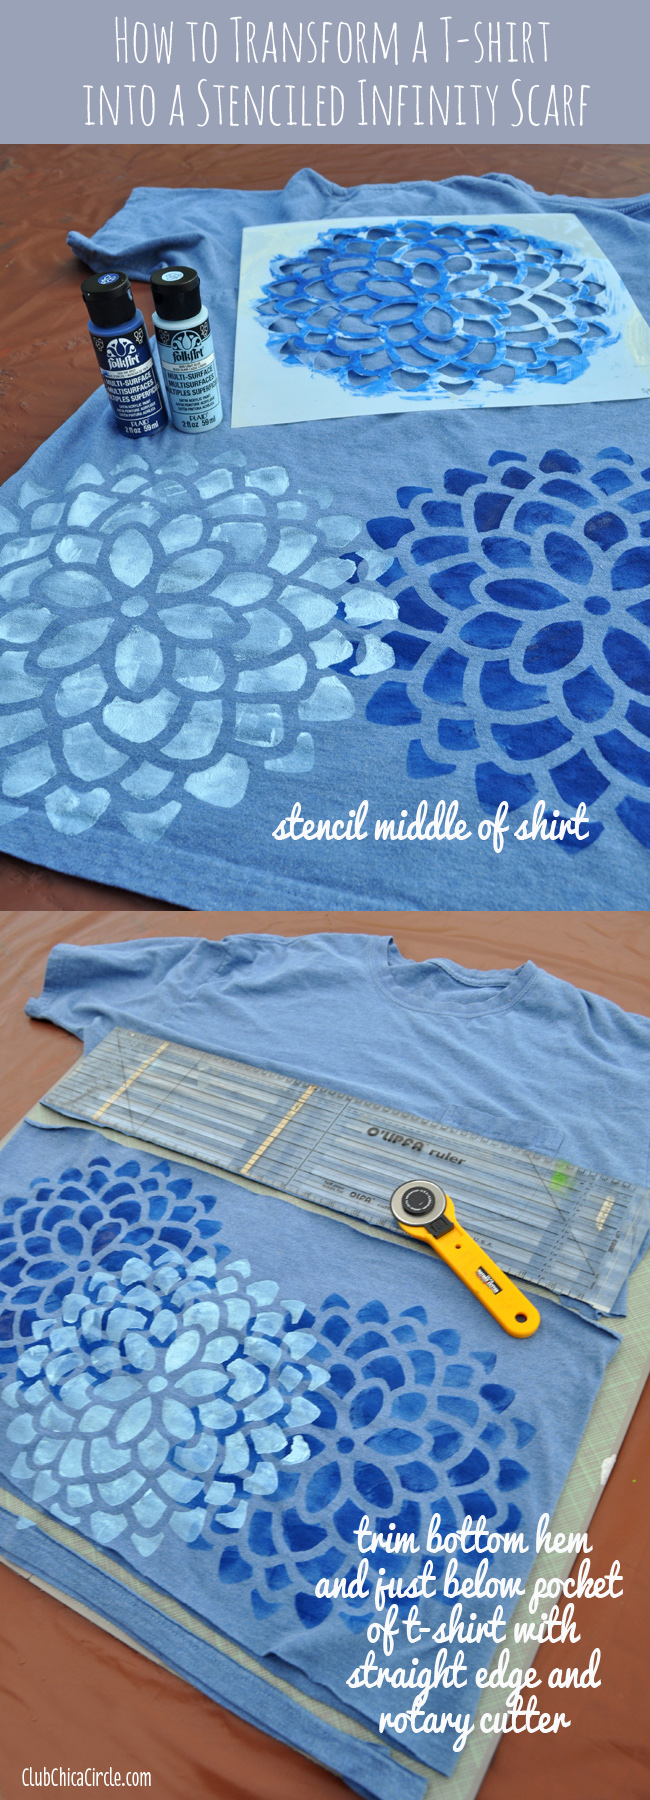 Stenciled Upcycled Tshirt Infinity Scarf DIY